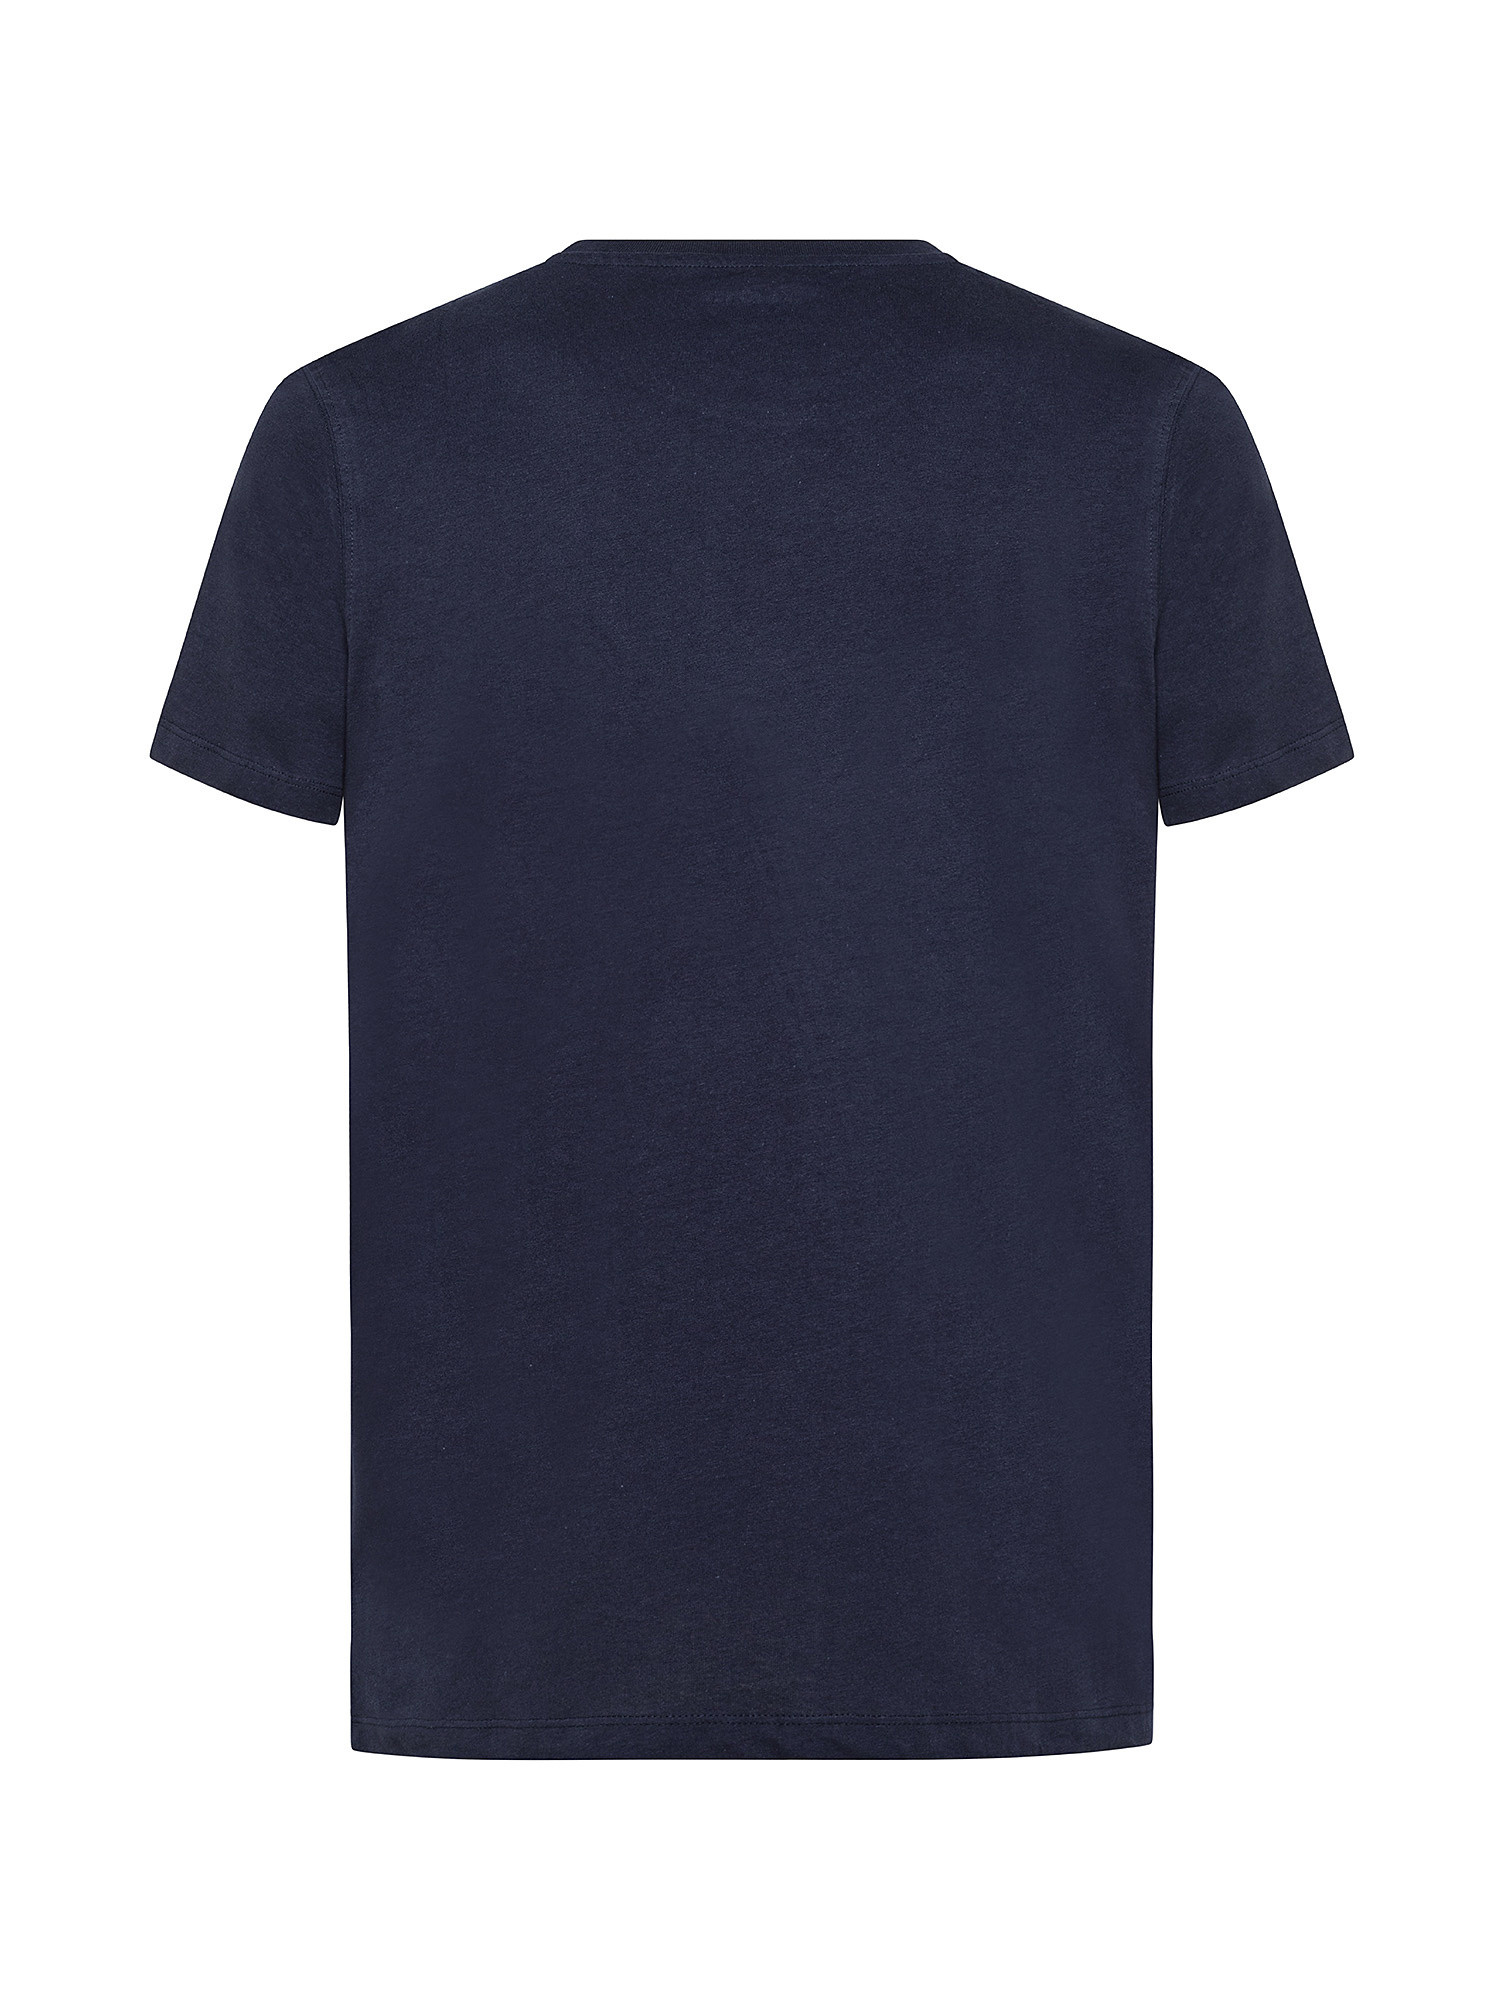 T-shirt con stampa, Blu scuro, large image number 1